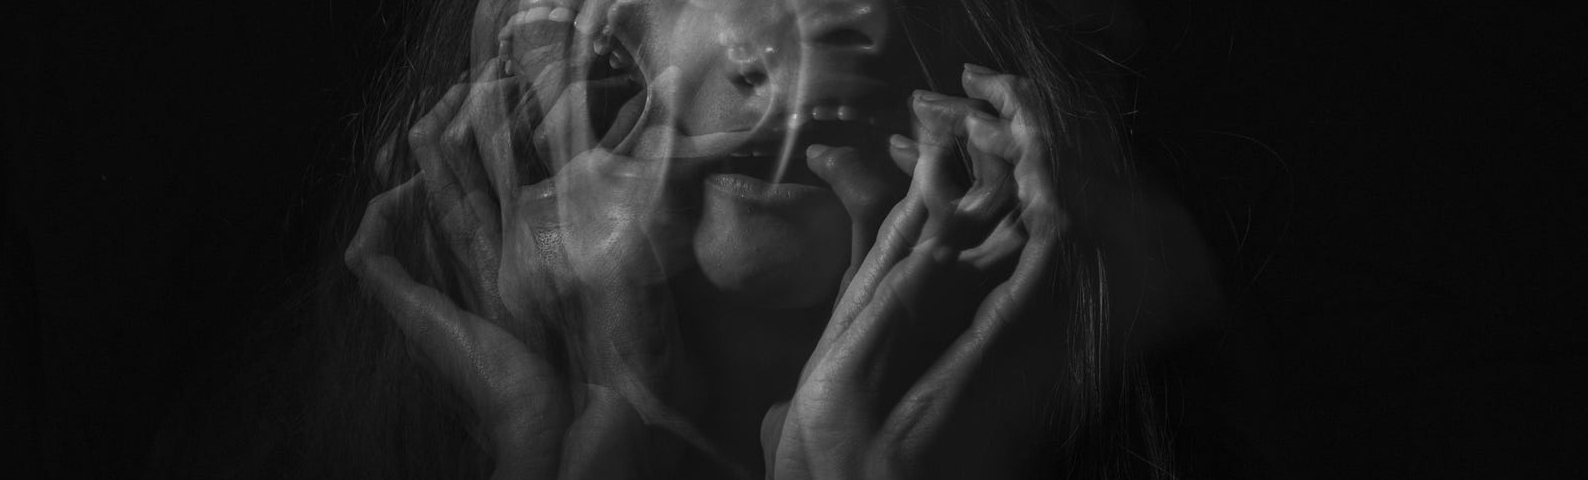 Ghostlike phot of a woman with her hands in front of her face.